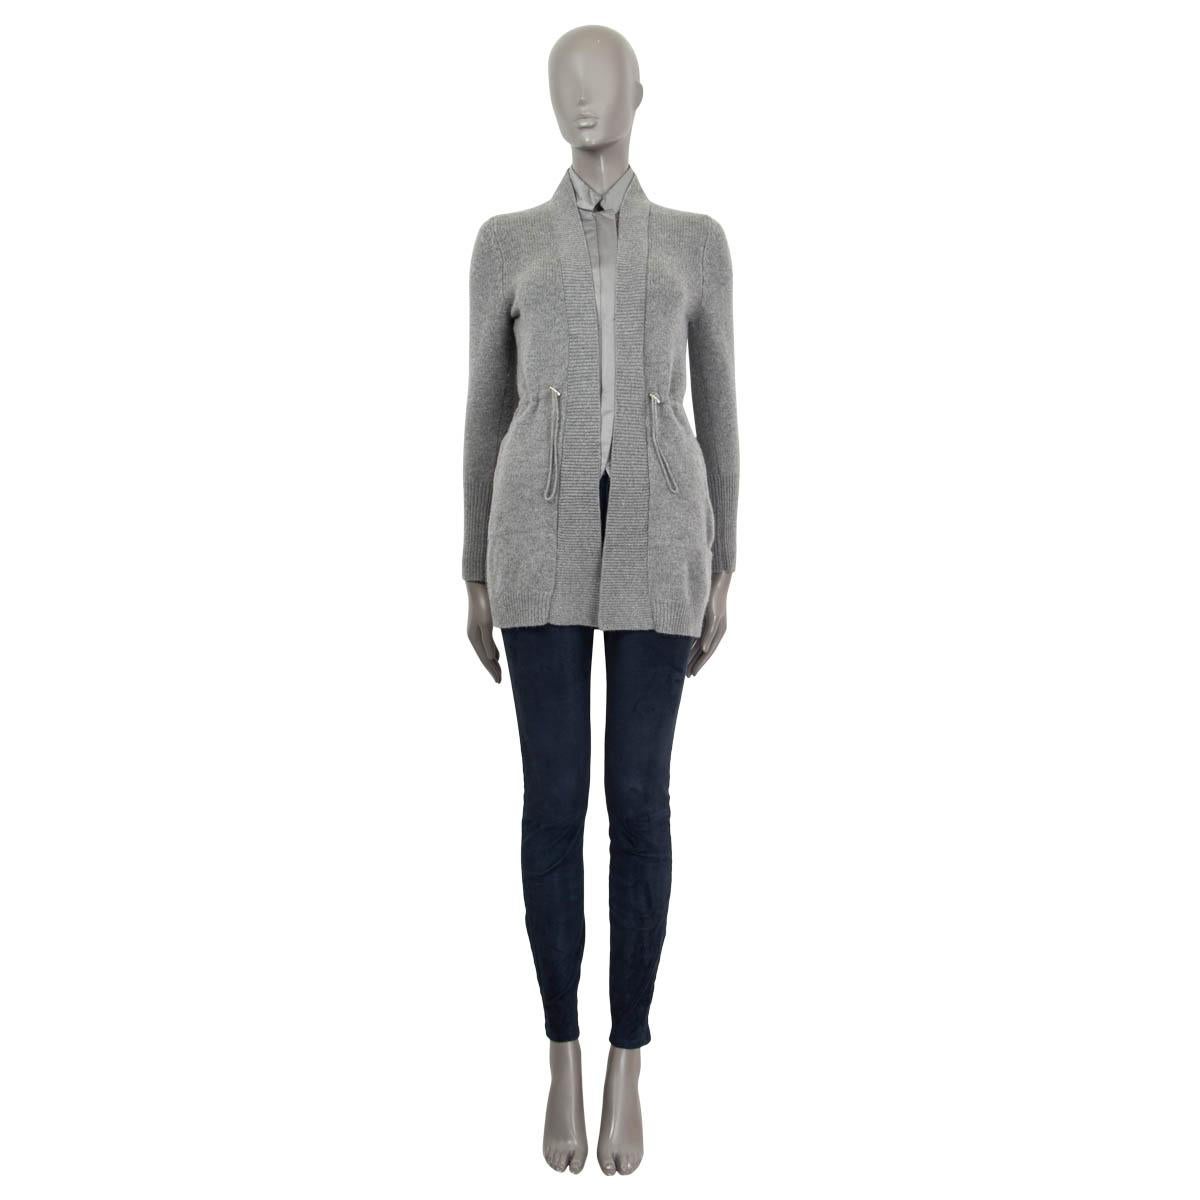 100% authentic Brunello Cucinelli zip-front cardigan in light gray cashmere (100%). Features two zipped pockets on the front. Opens with a zipper on the front. Unlined. The zipper is broken, otherwise in excellent condition.

Measurements
Tag